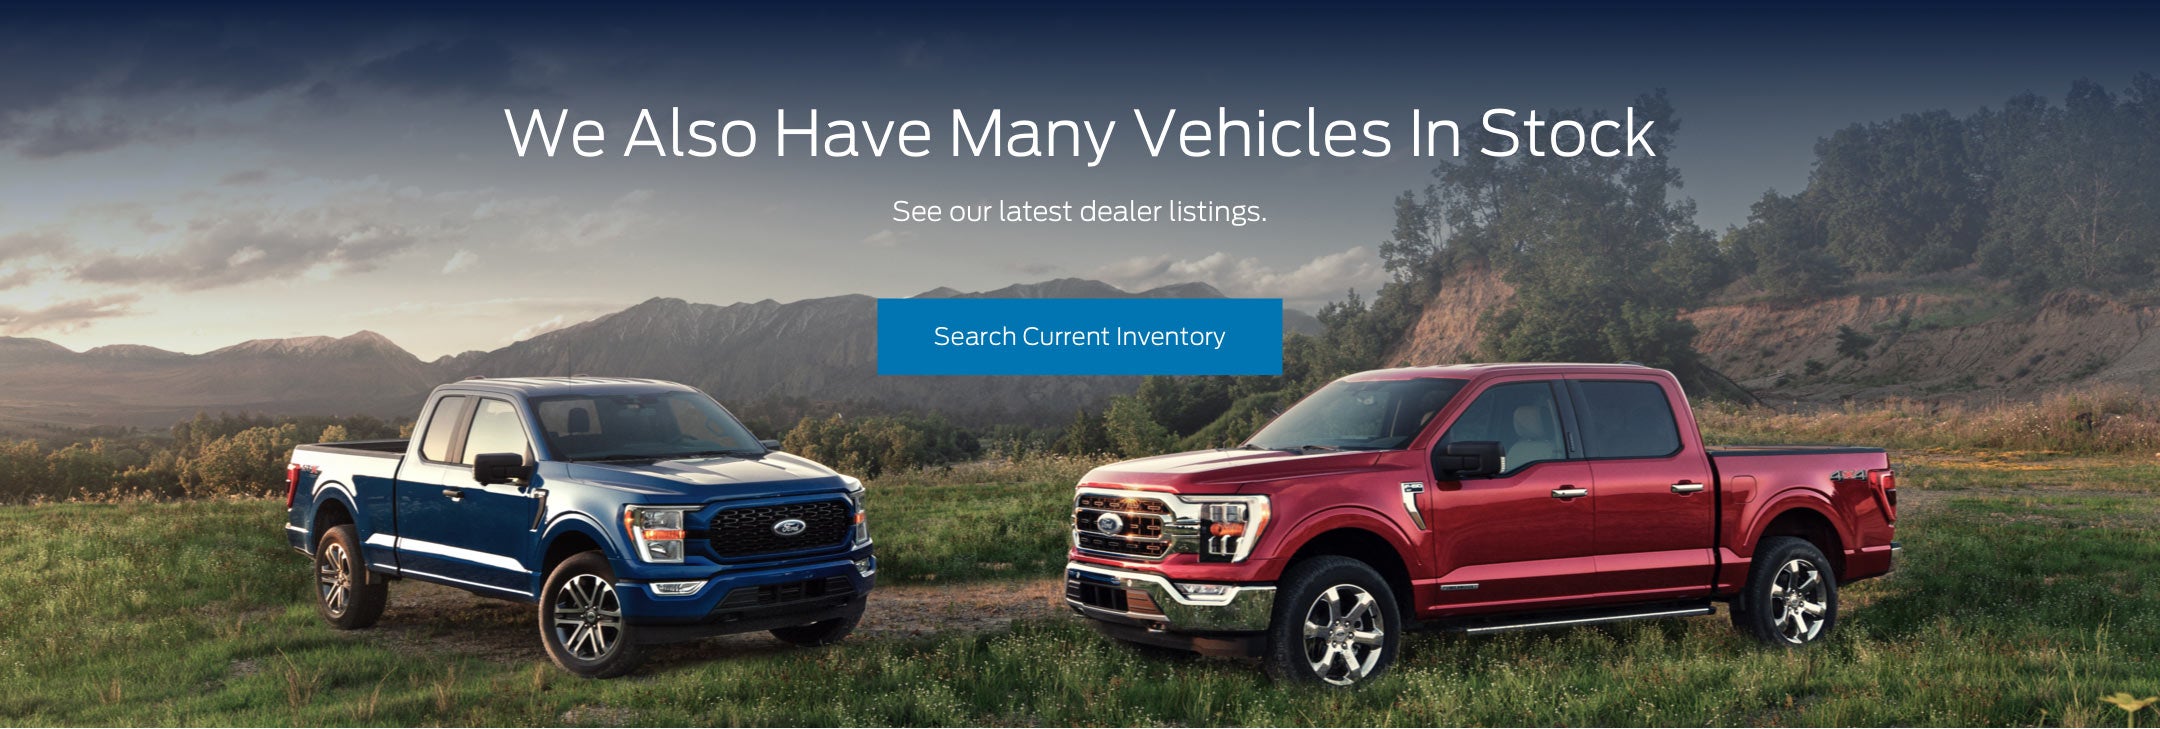 Ford vehicles in stock | Barton Ford in Suffolk VA